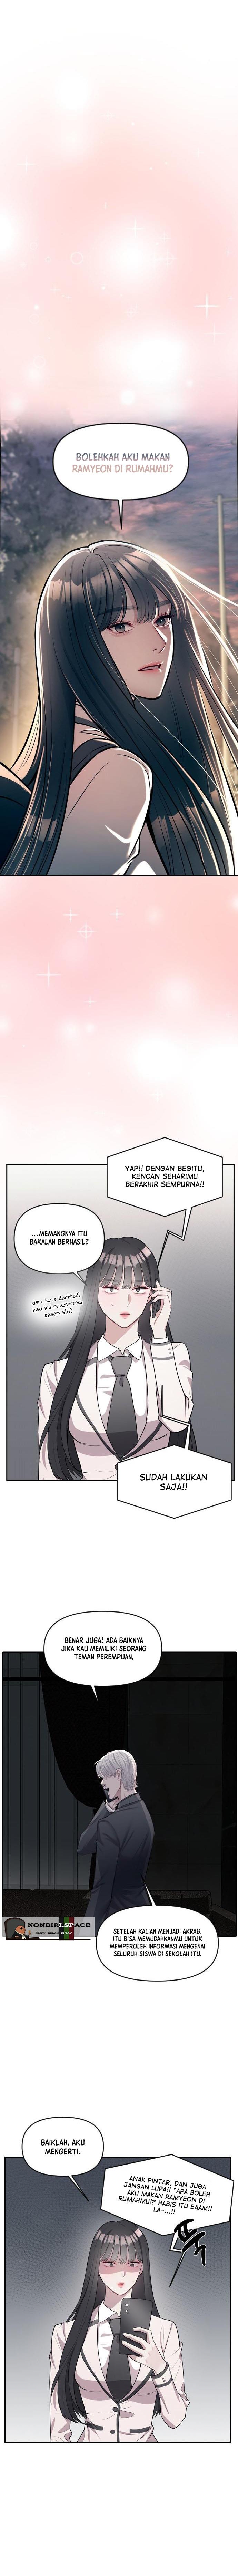 Undercover! Chaebol High School Chapter 2